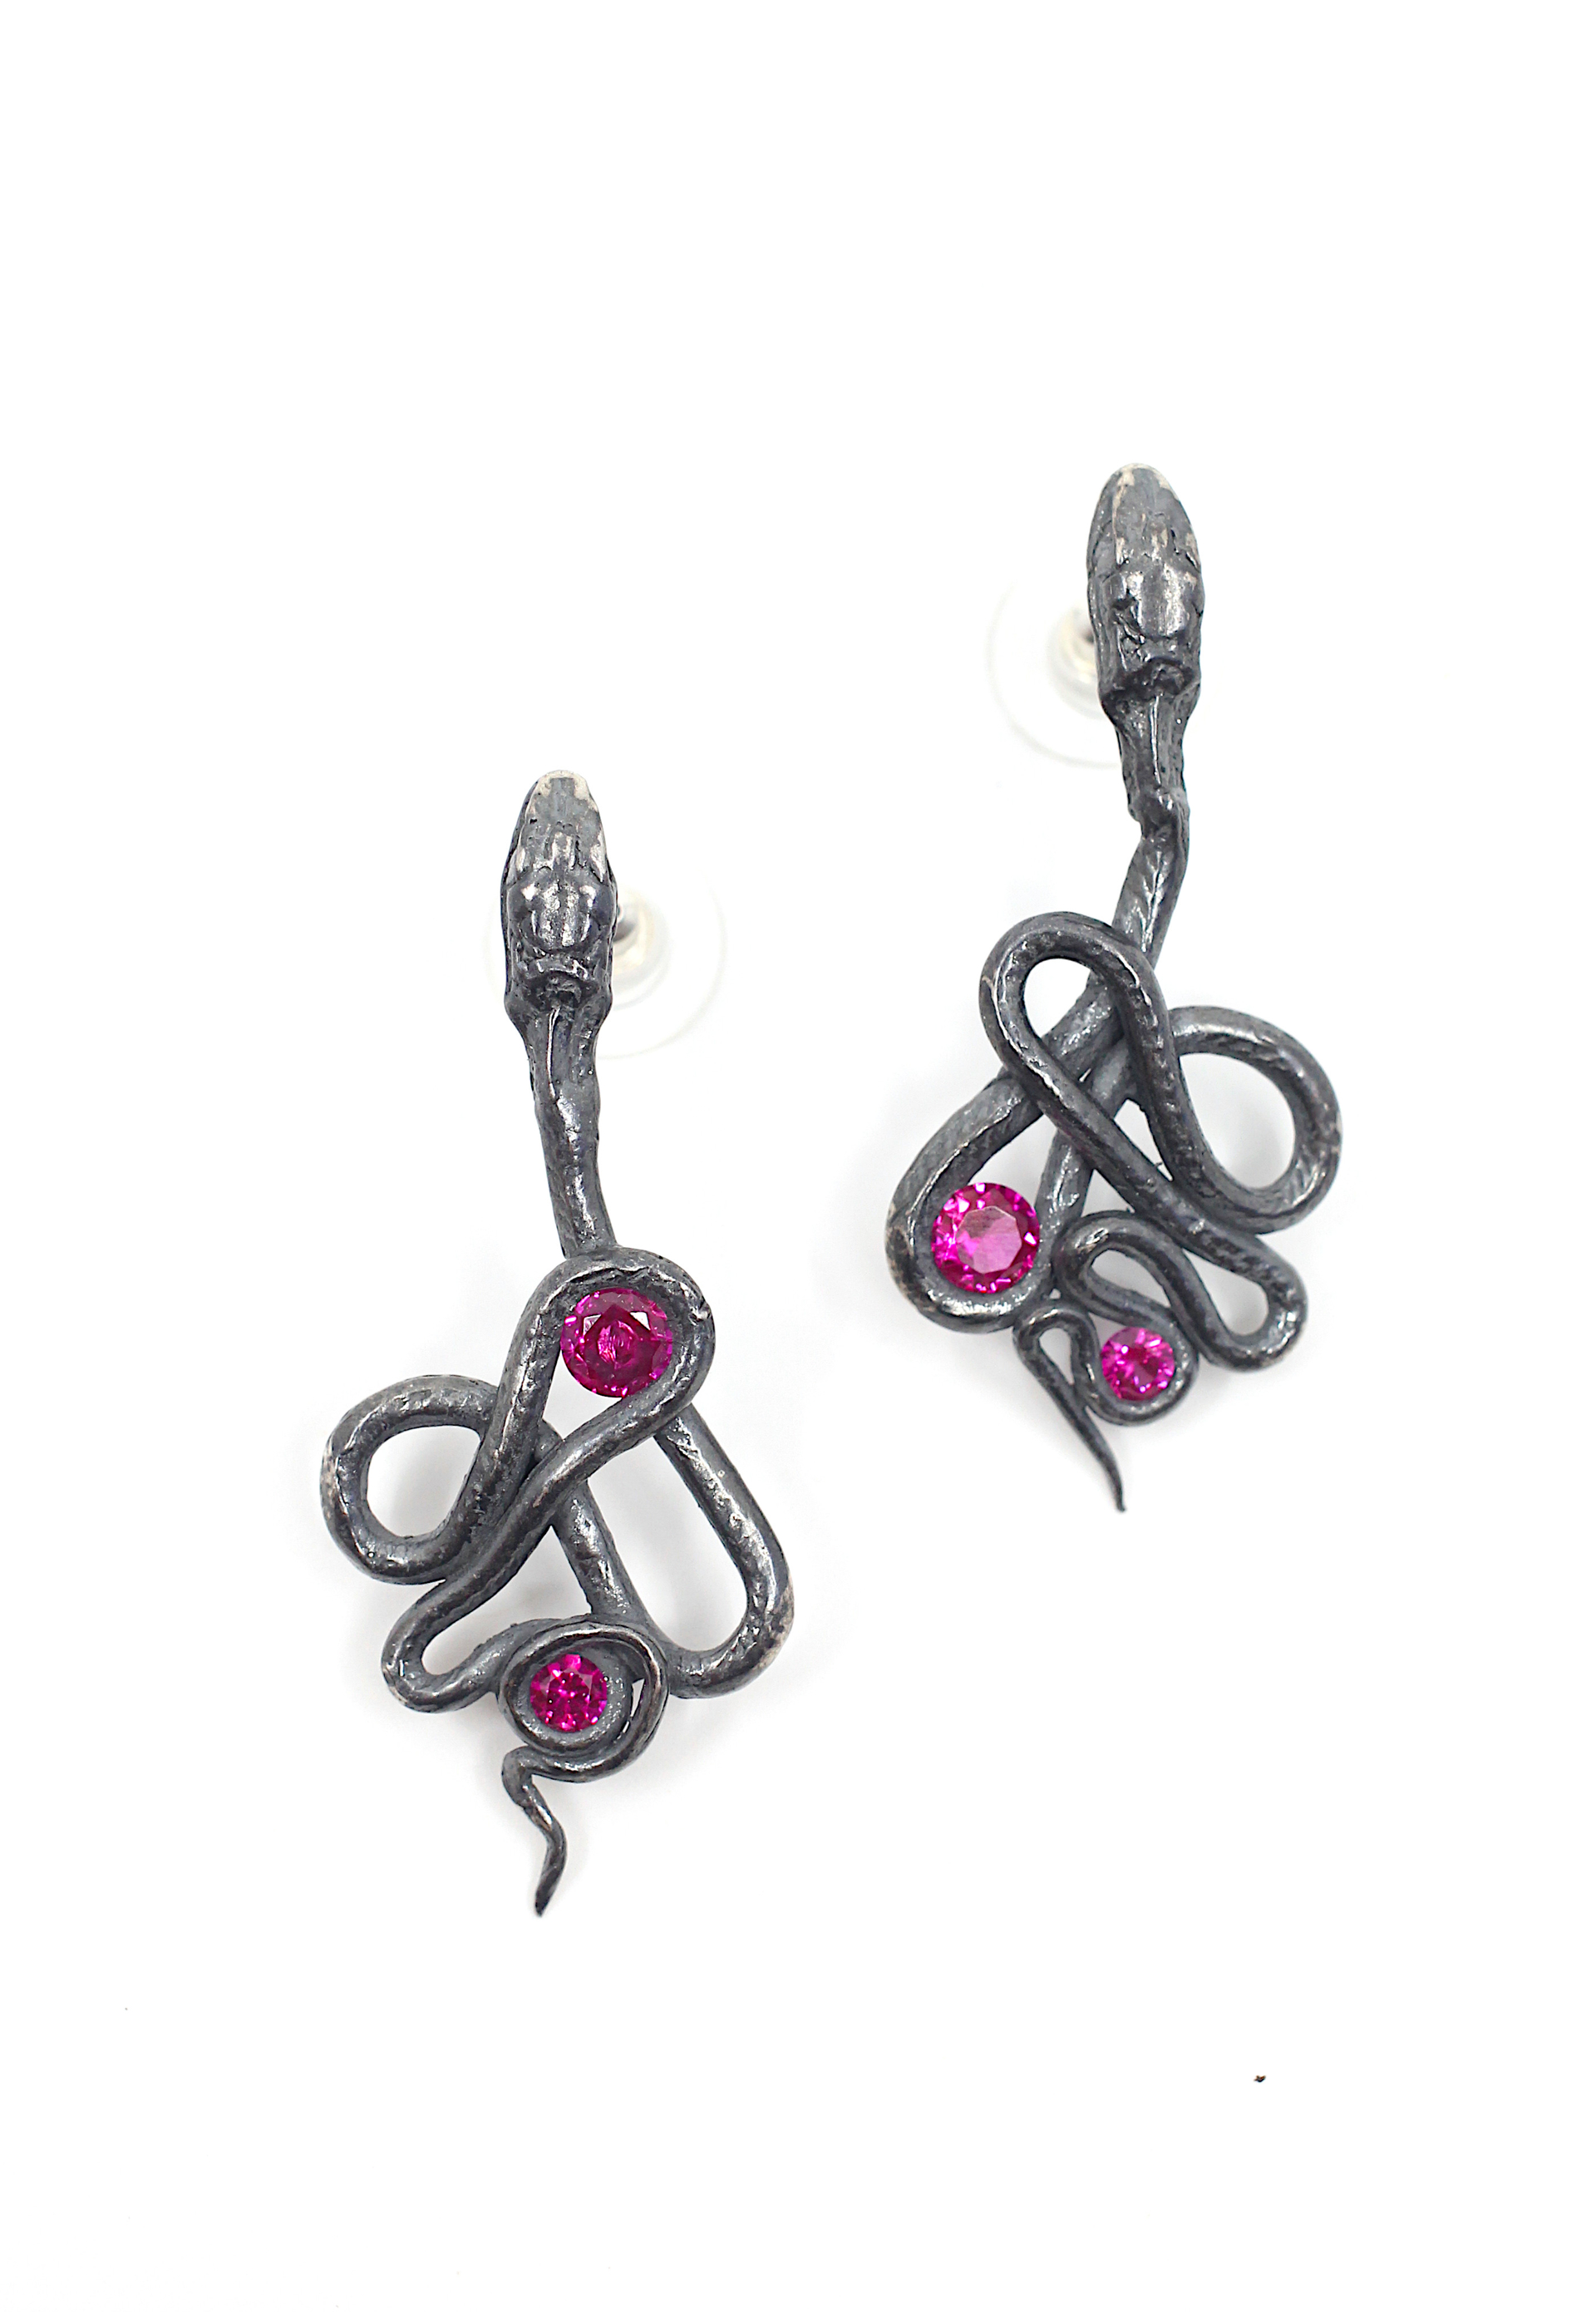 Ruby Serpentine Earrings (small) by Anna Johnson